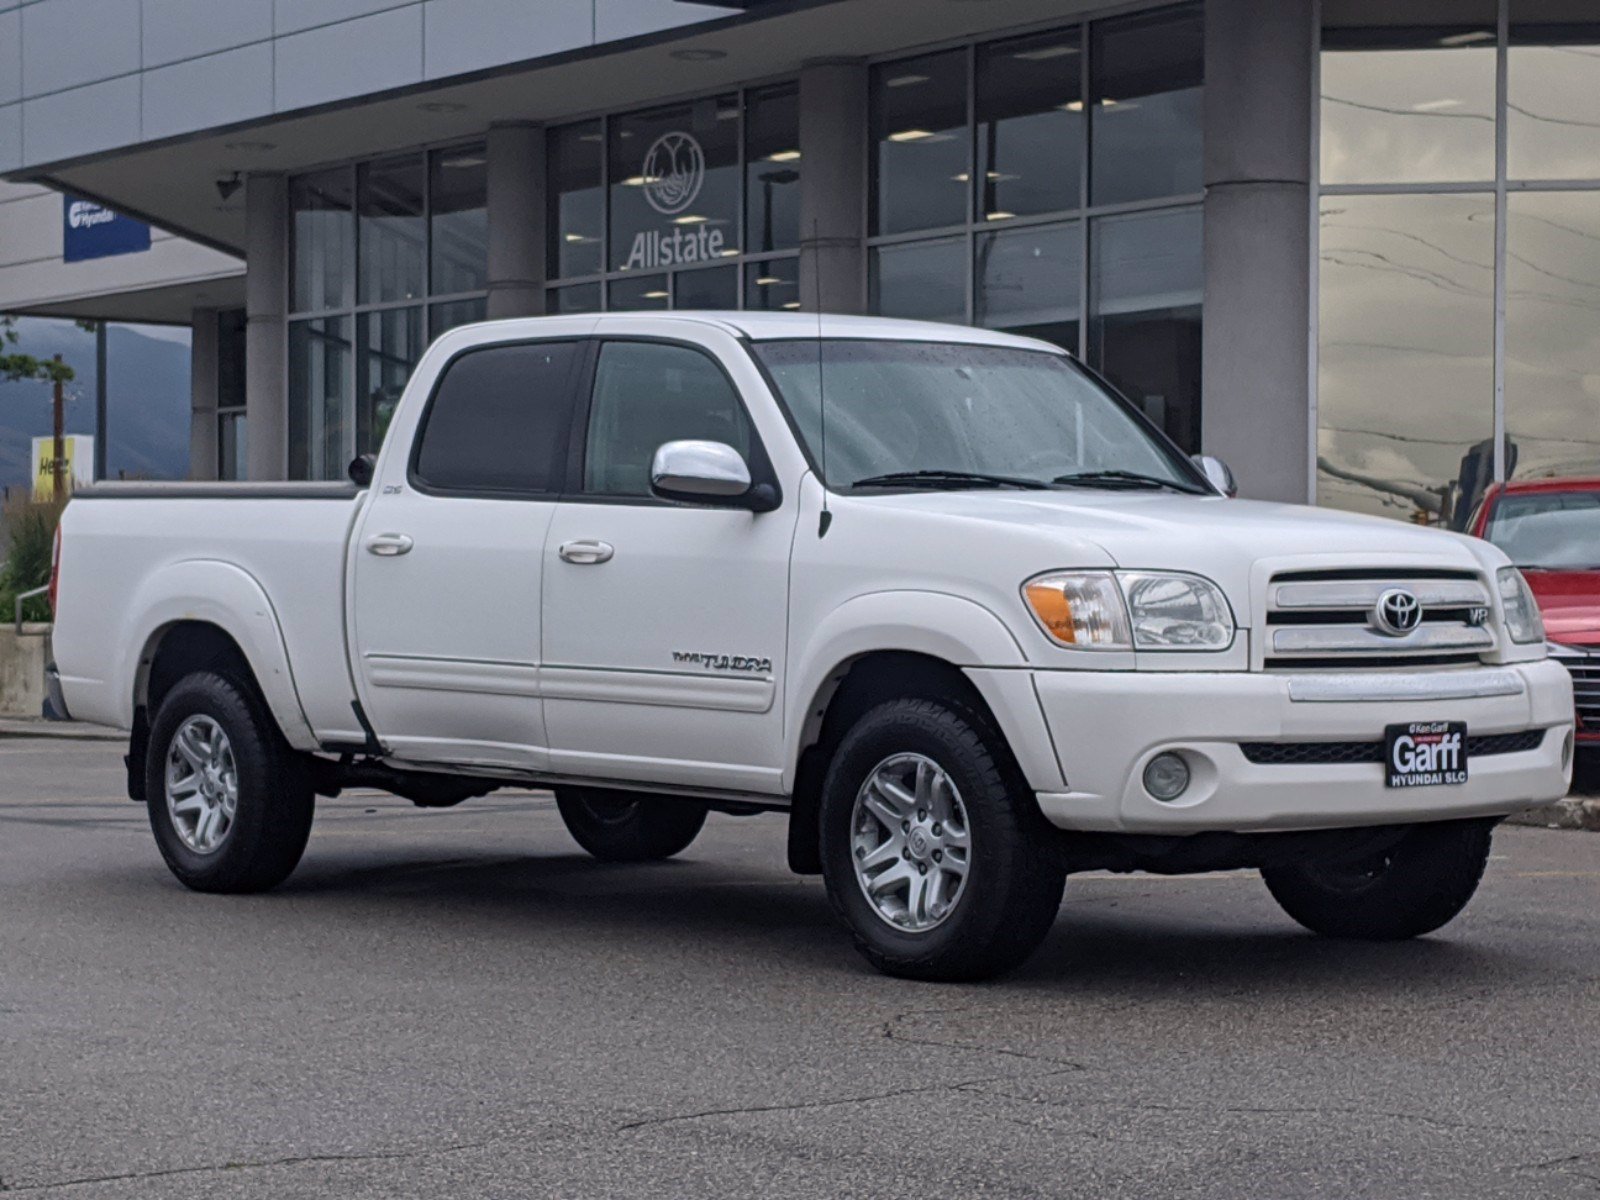 Pre-Owned 2006 Toyota Tundra SR5 Crew Cab Pickup in Salt Lake City